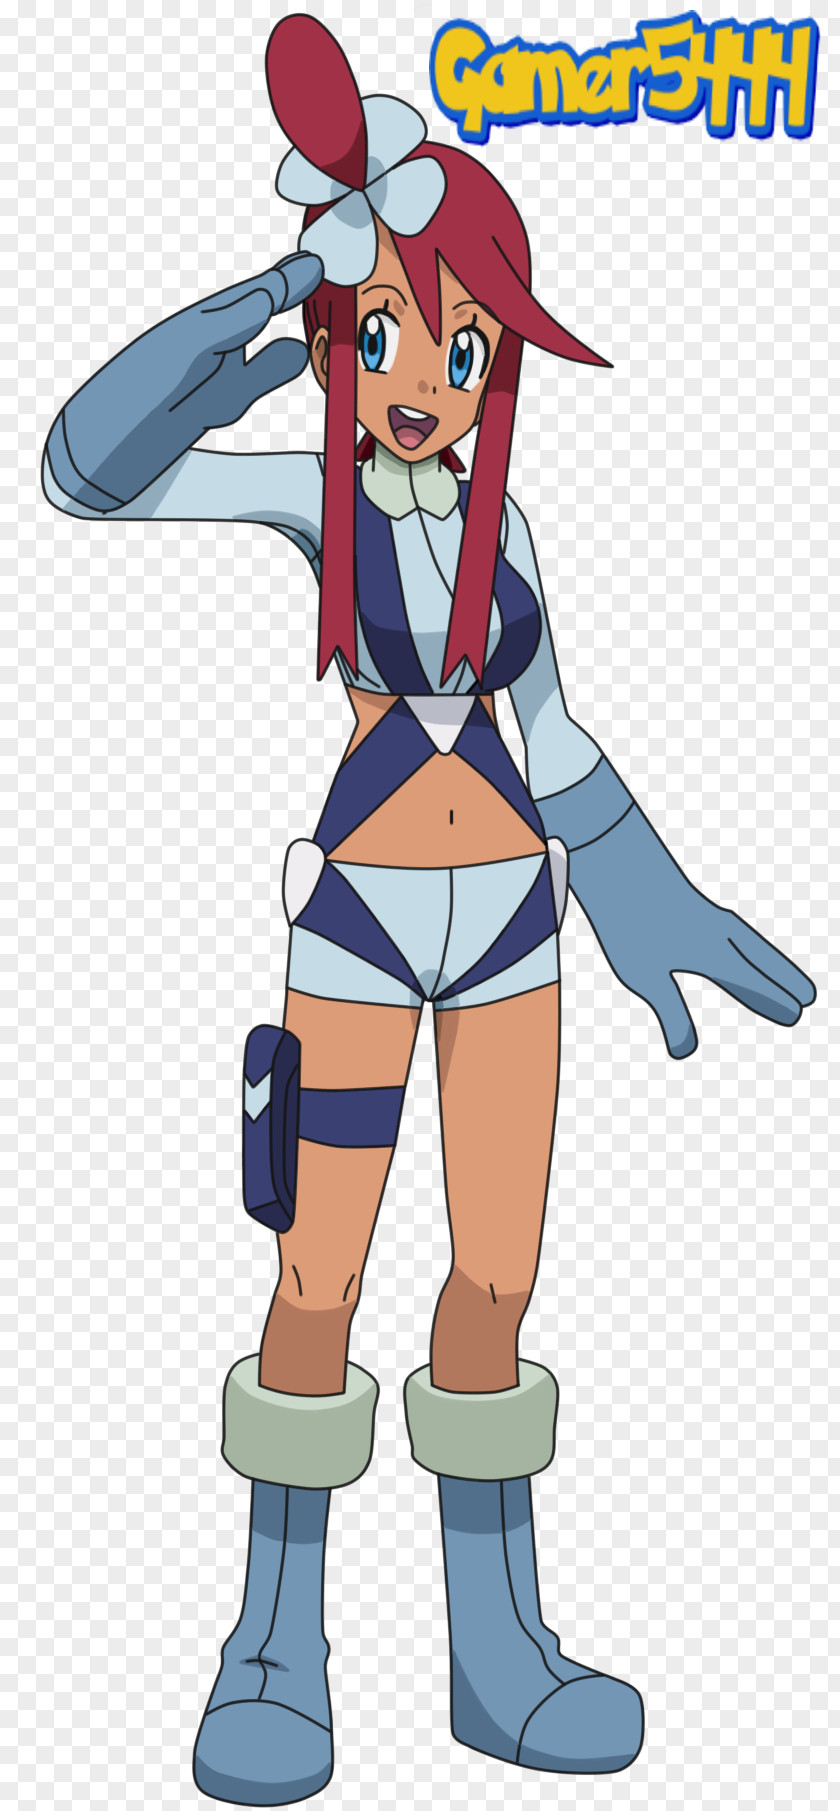 Company With A Duck In Its Logo Serena Pokémon X And Y Pikachu Misty PNG